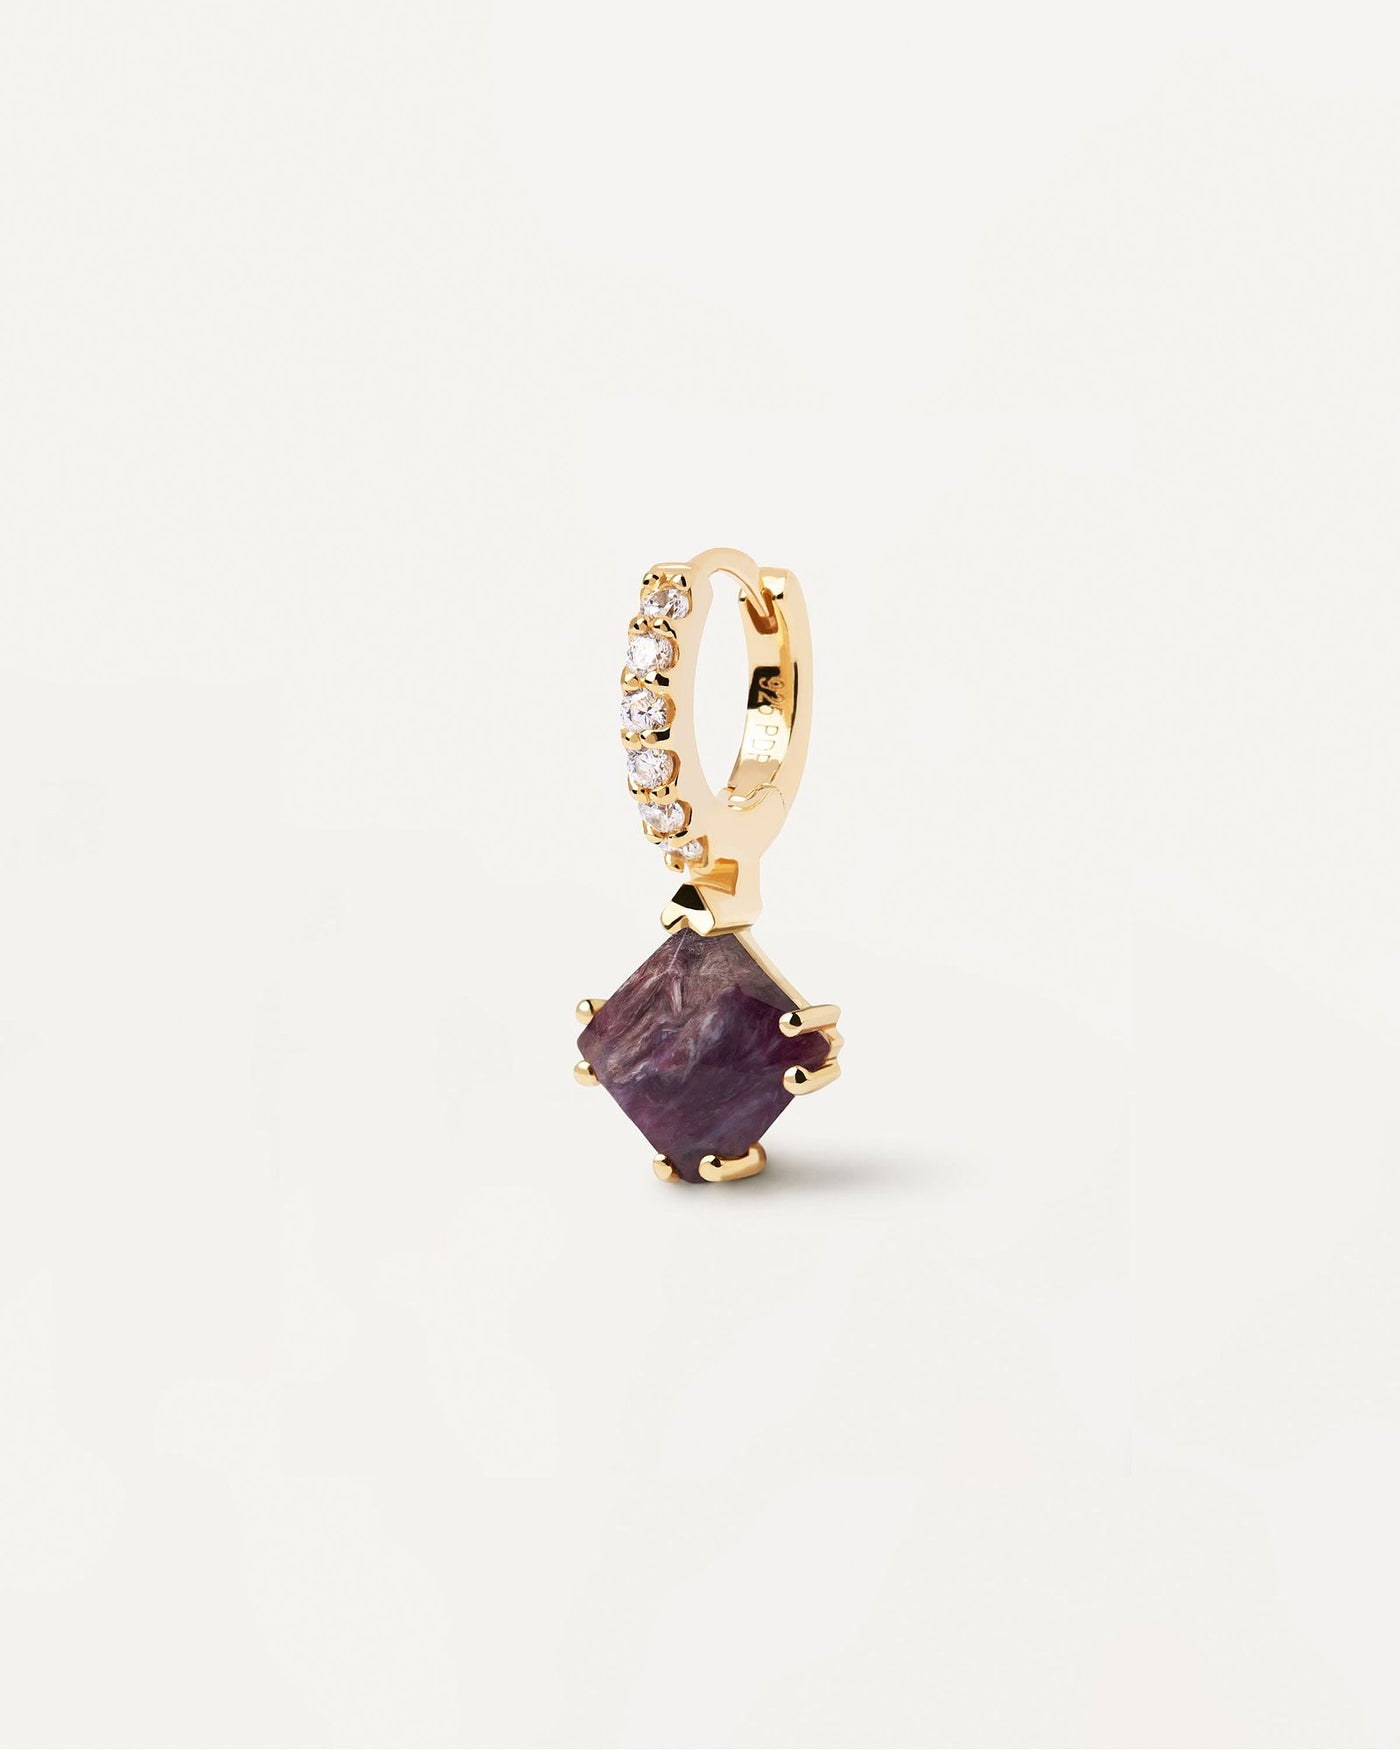 2024 Selection | Fuji Charoite Single Earring. Gold-plated hoop ear piercing with white zirconia and purple squared gemstone pendant. Get the latest arrival from PDPAOLA. Place your order safely and get this Best Seller. Free Shipping.